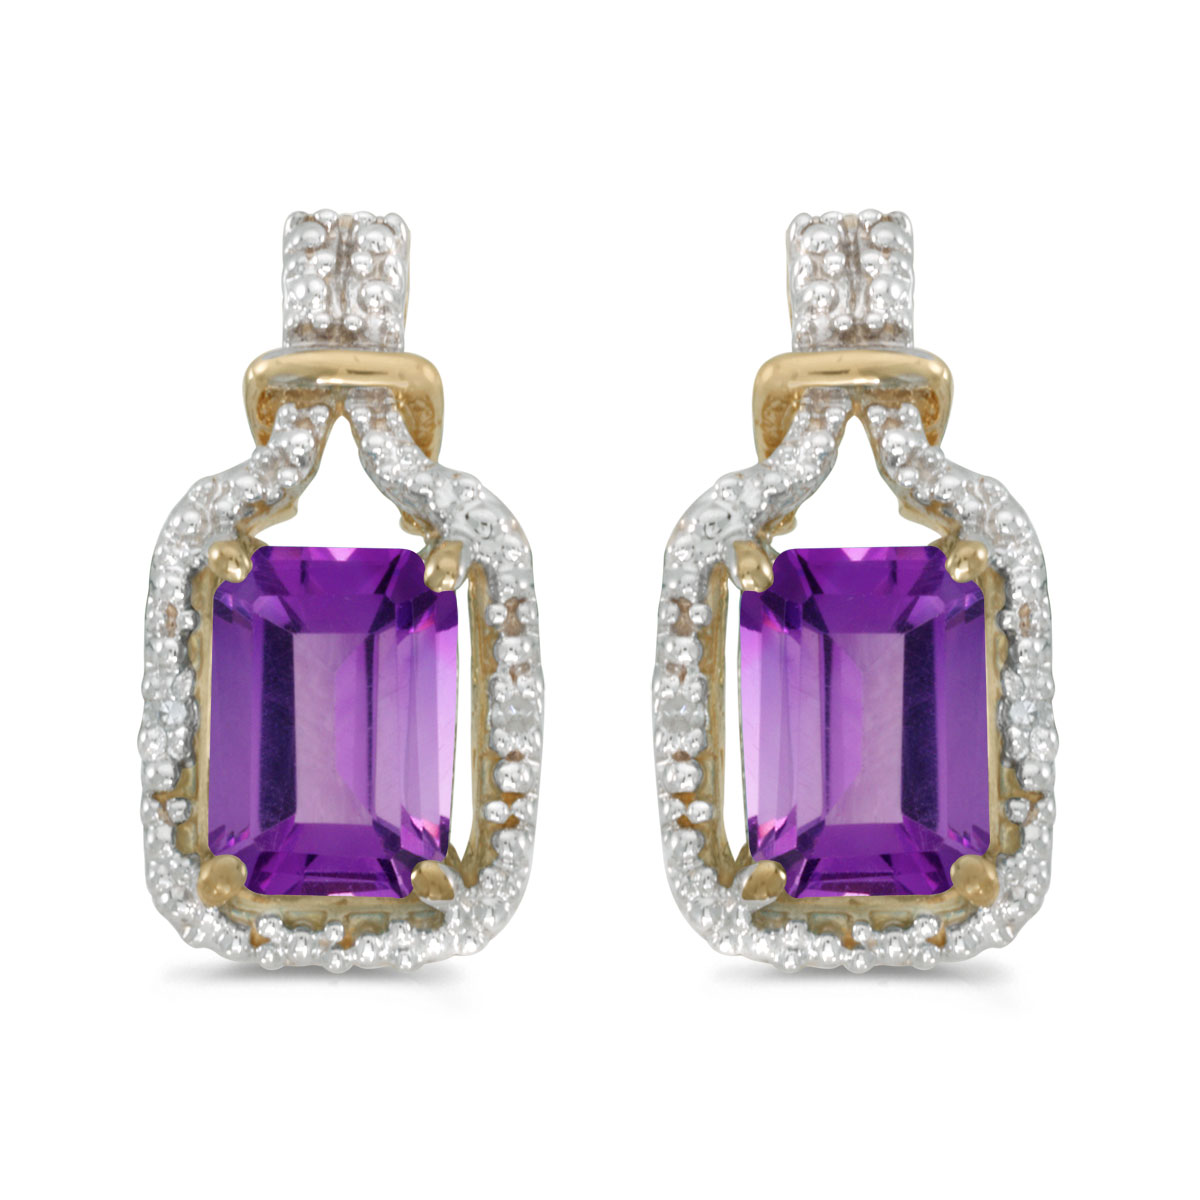 These 14k yellow gold emerald-cut amethyst and diamond earrings feature 7x5 mm genuine natural am...